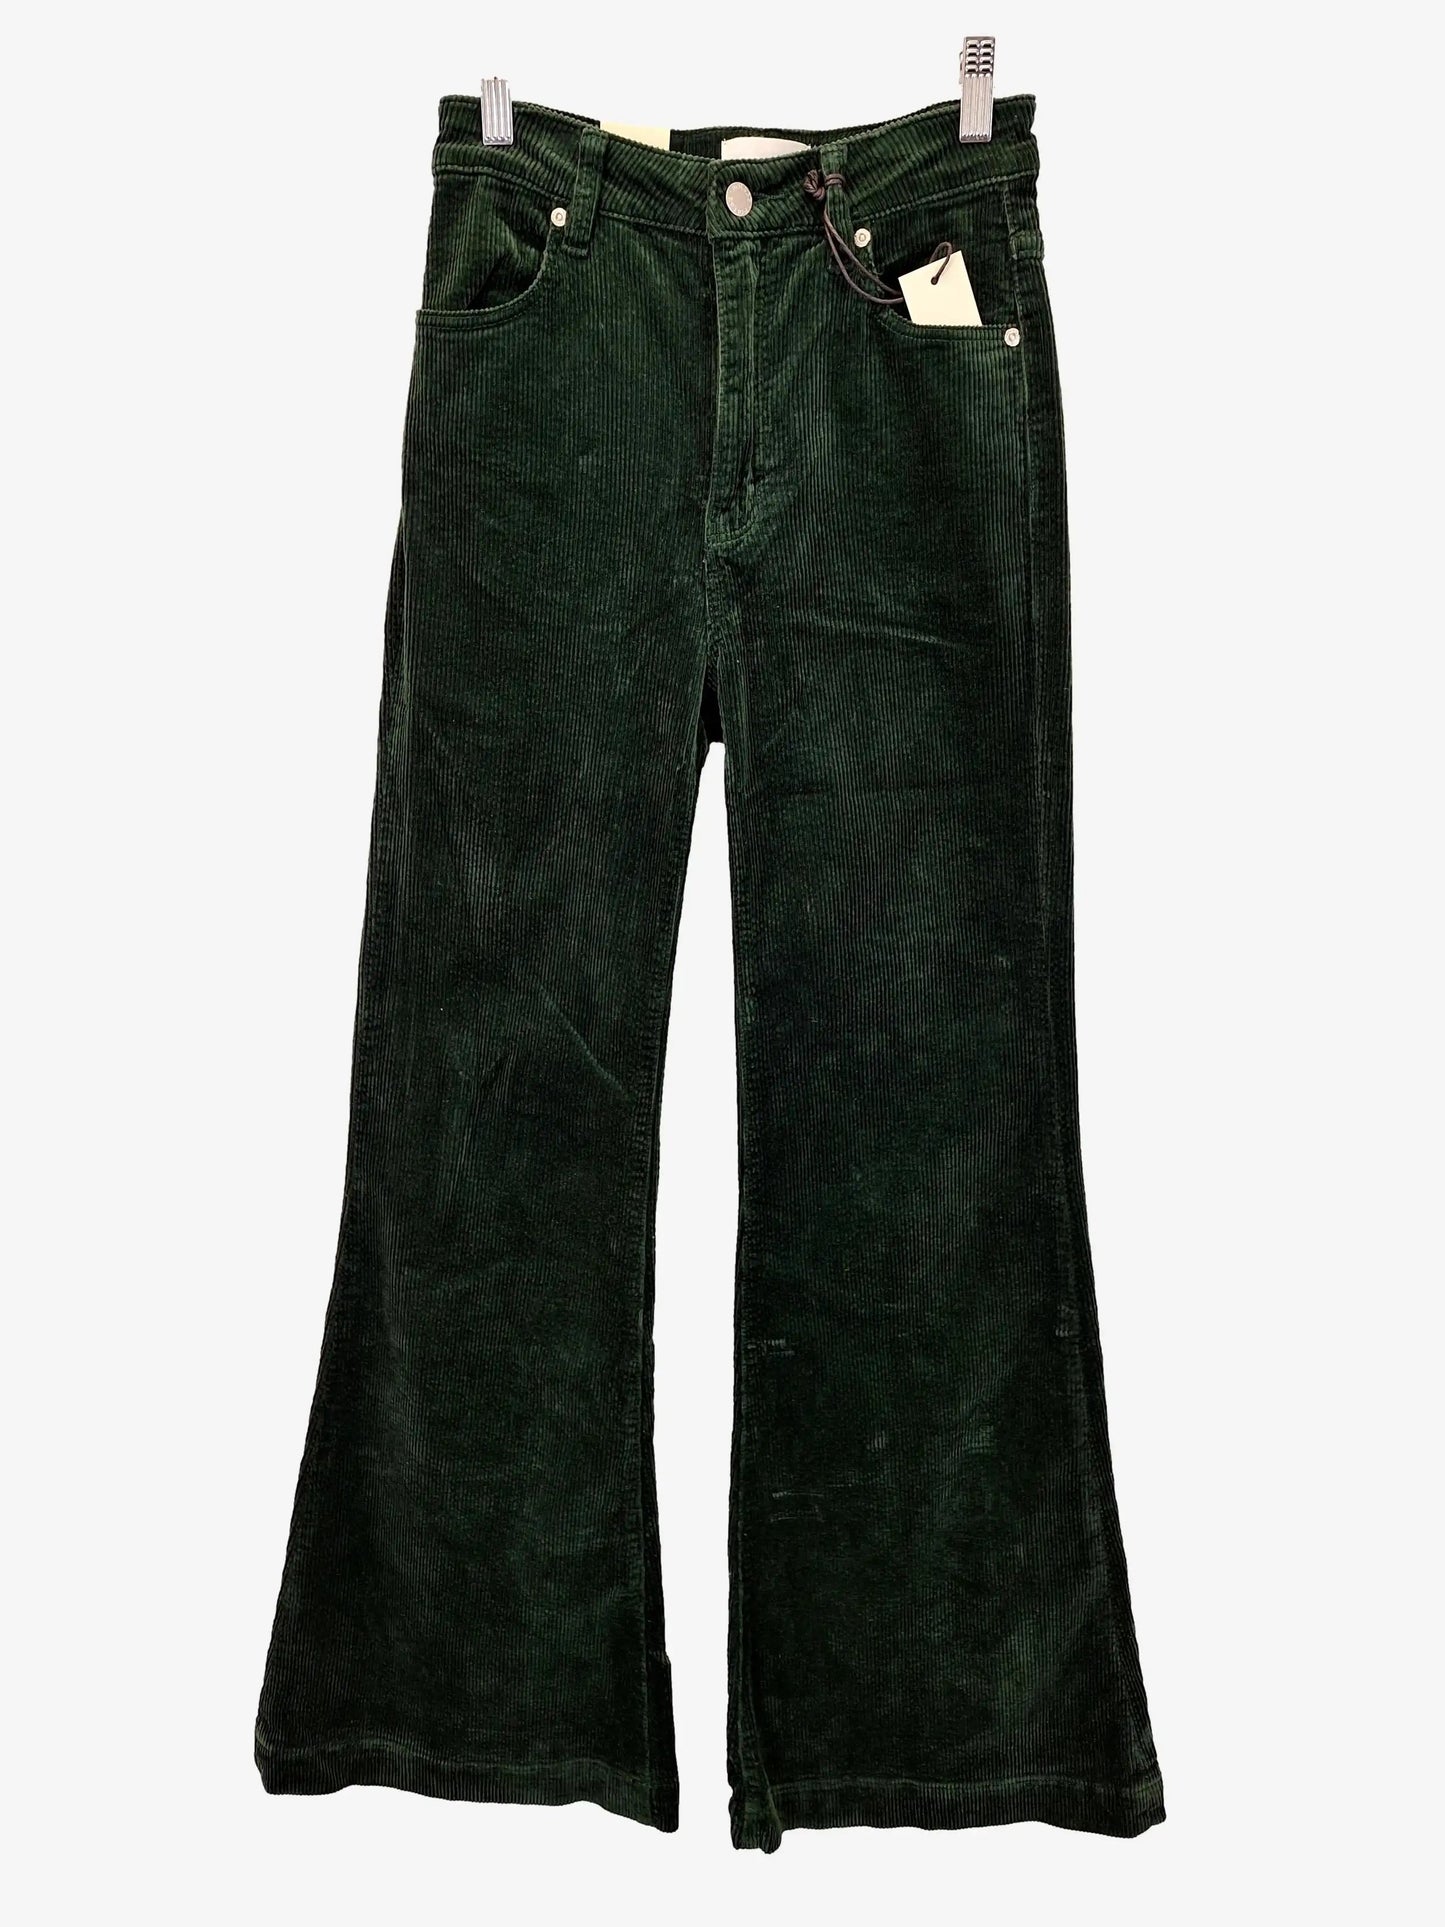 Rolla's Eastcoast Flare Ivy Cord Pants Size 6 by SwapUp-Online Second Hand Store-Online Thrift Store